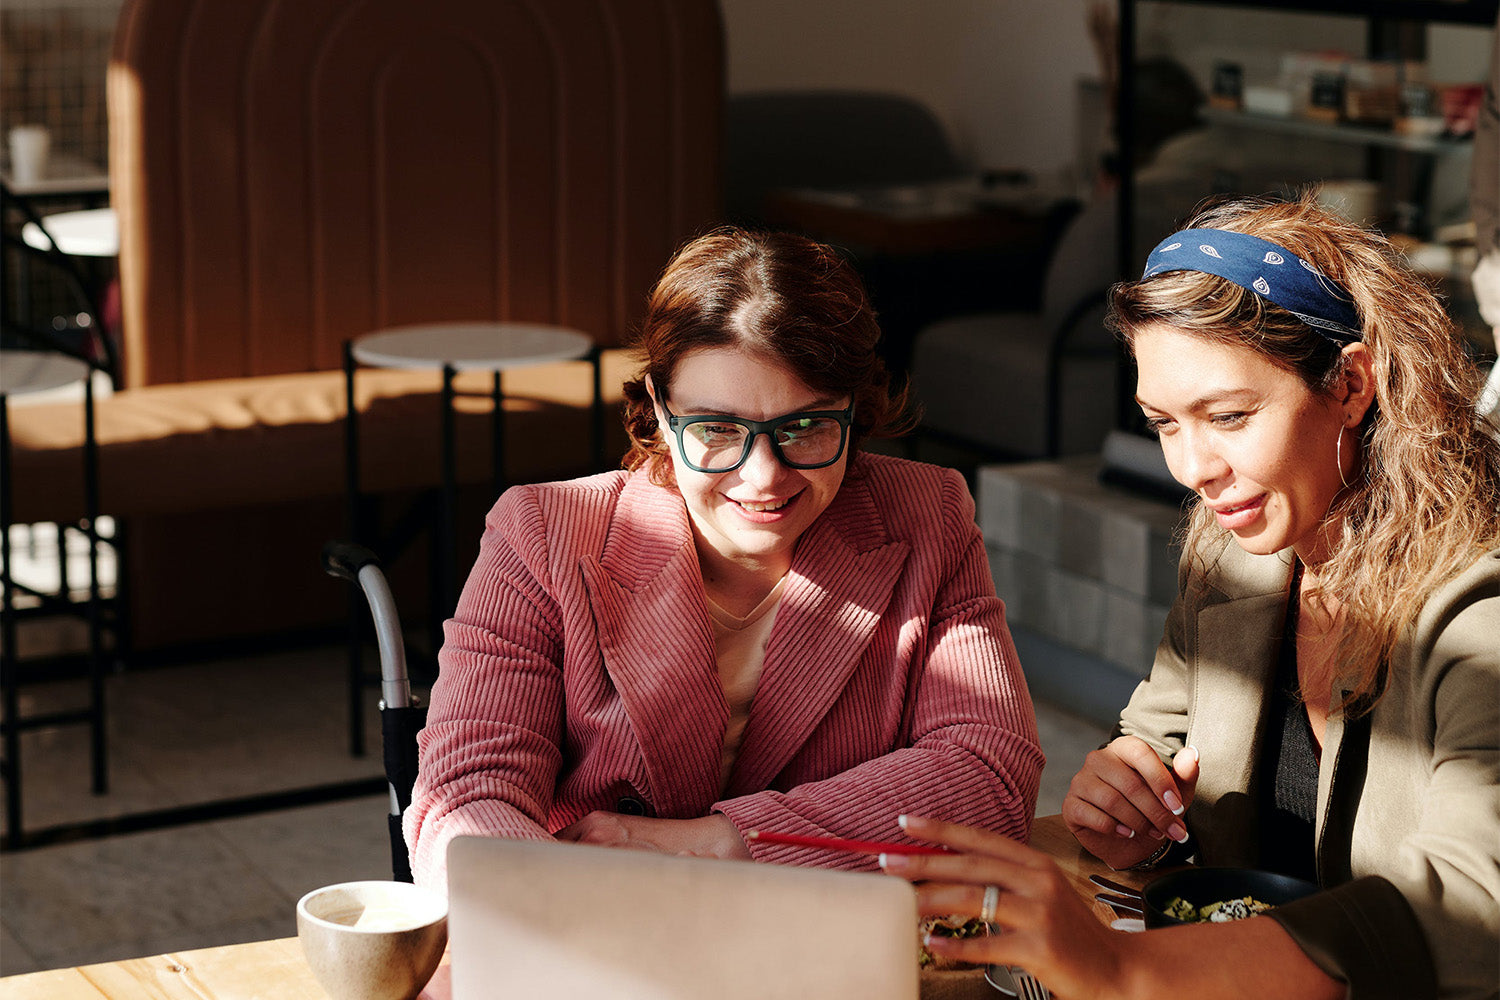 Two women sit at a table looking at a laptop together